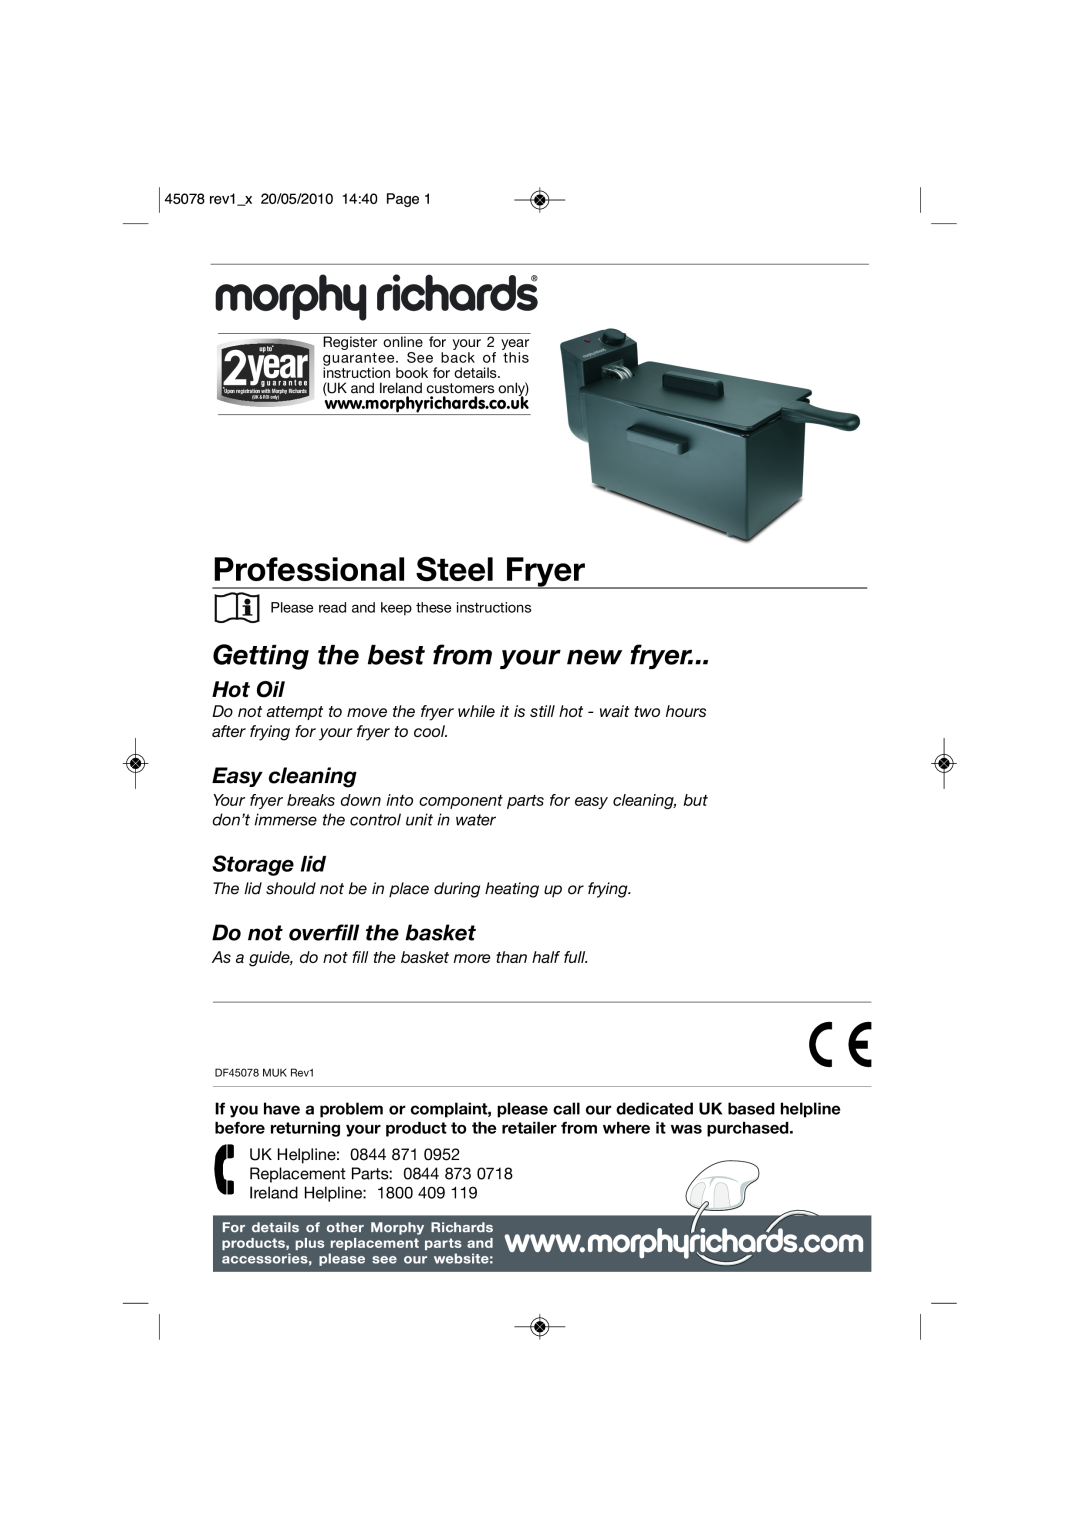 Morphy Richards DF45078 manual Professional Steel Fryer, Getting the best from your new fryer, Hot Oil, Easy cleaning 